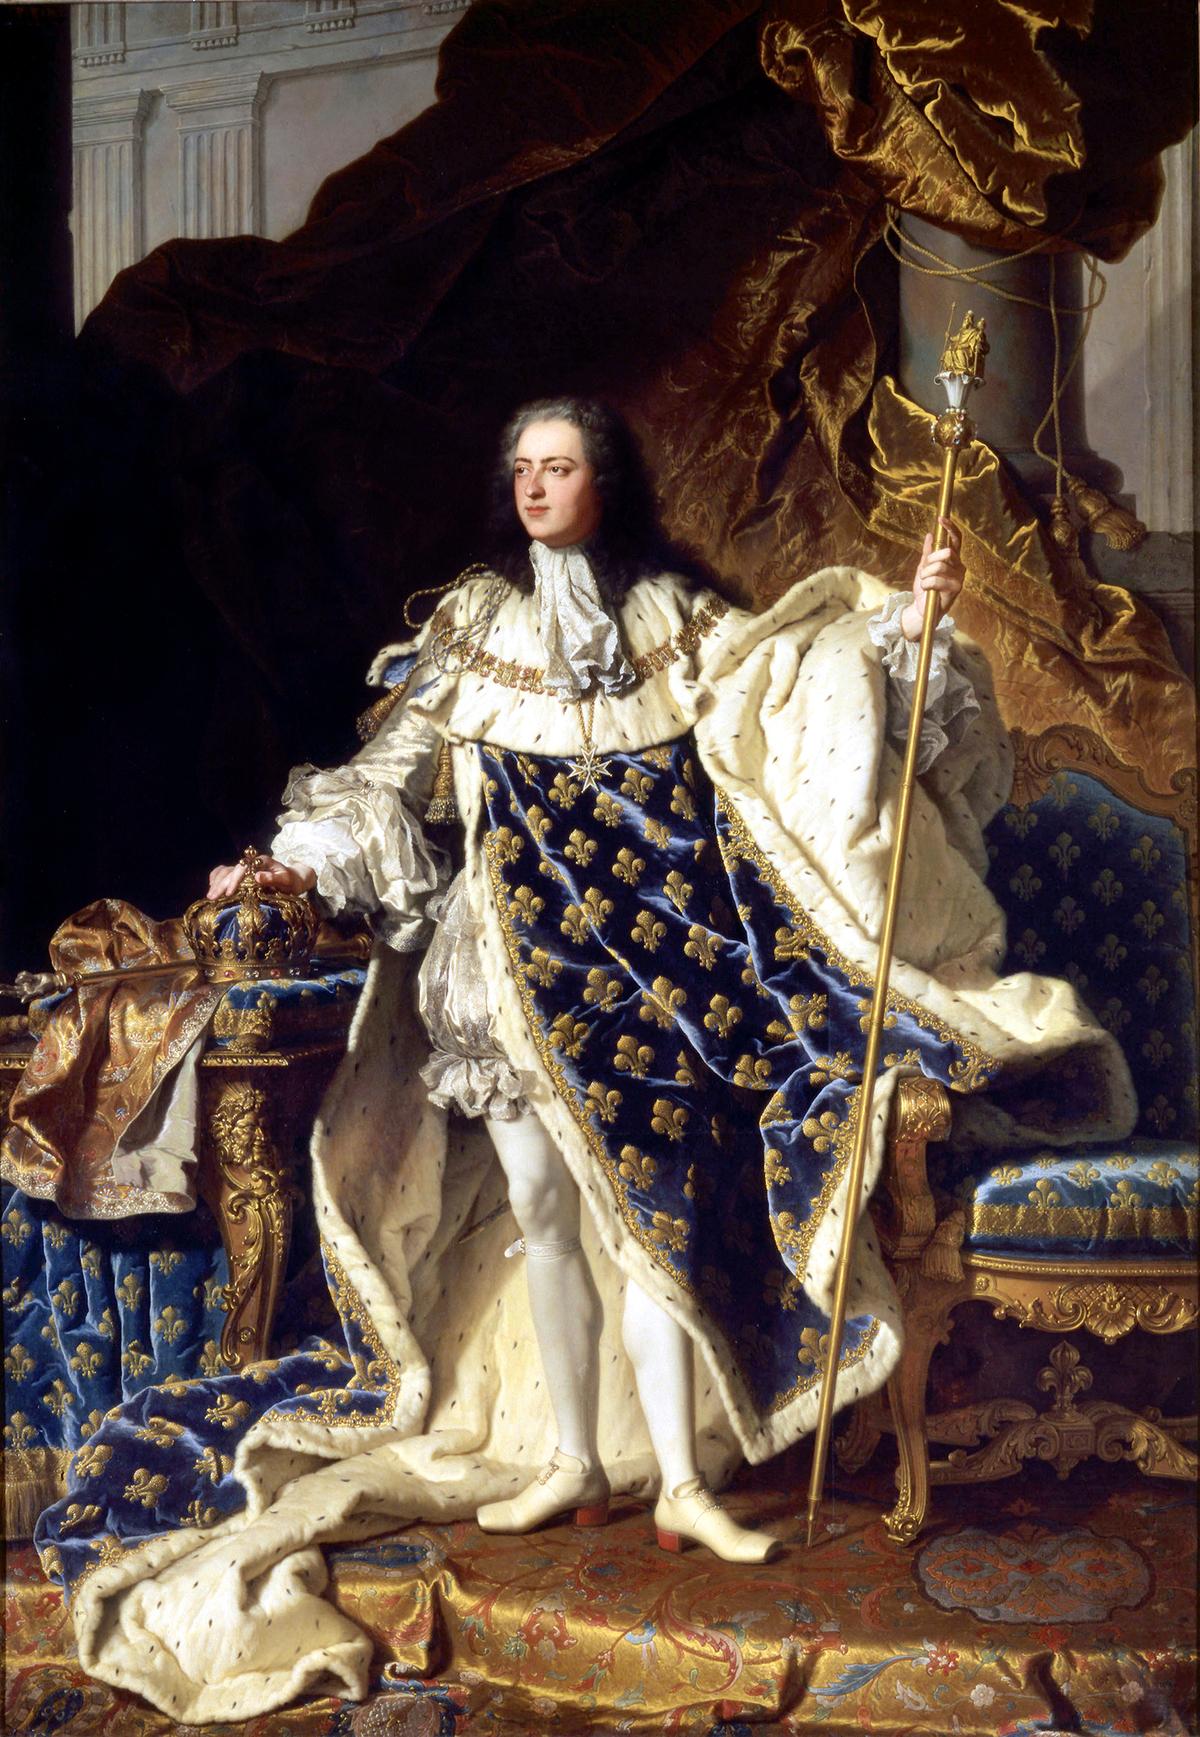 "Louis XV in Coronation Robes," 1730, by Hyacinthe Rigaud. Oil on canvas. Palace of Versailles, France. (Public Domain